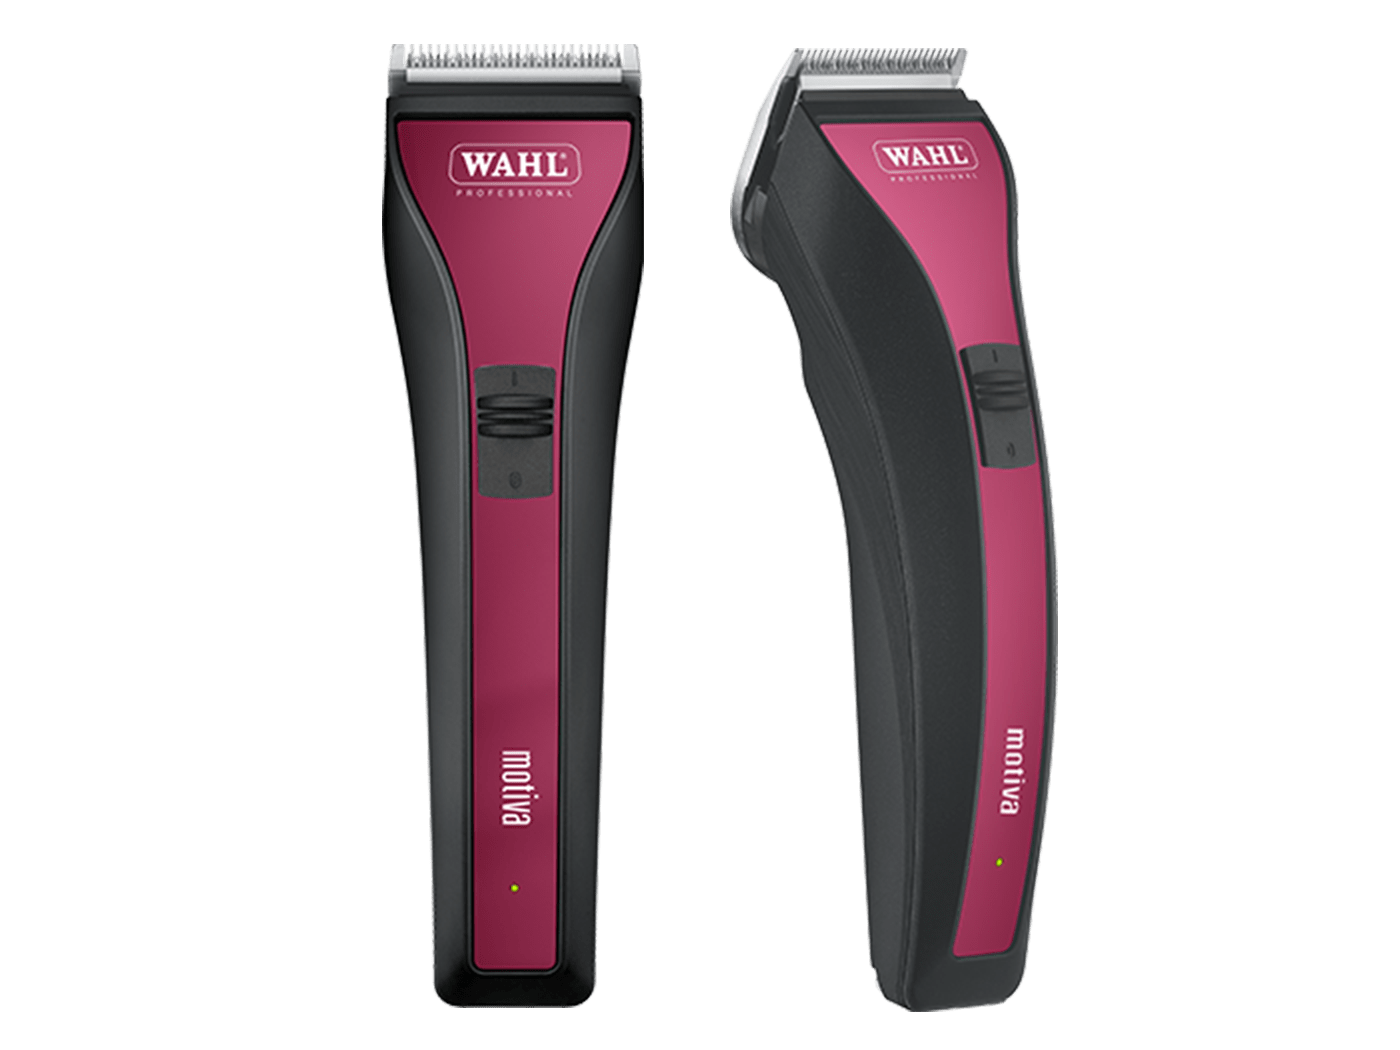 Wahl Motiva - Motivation for Perfection!